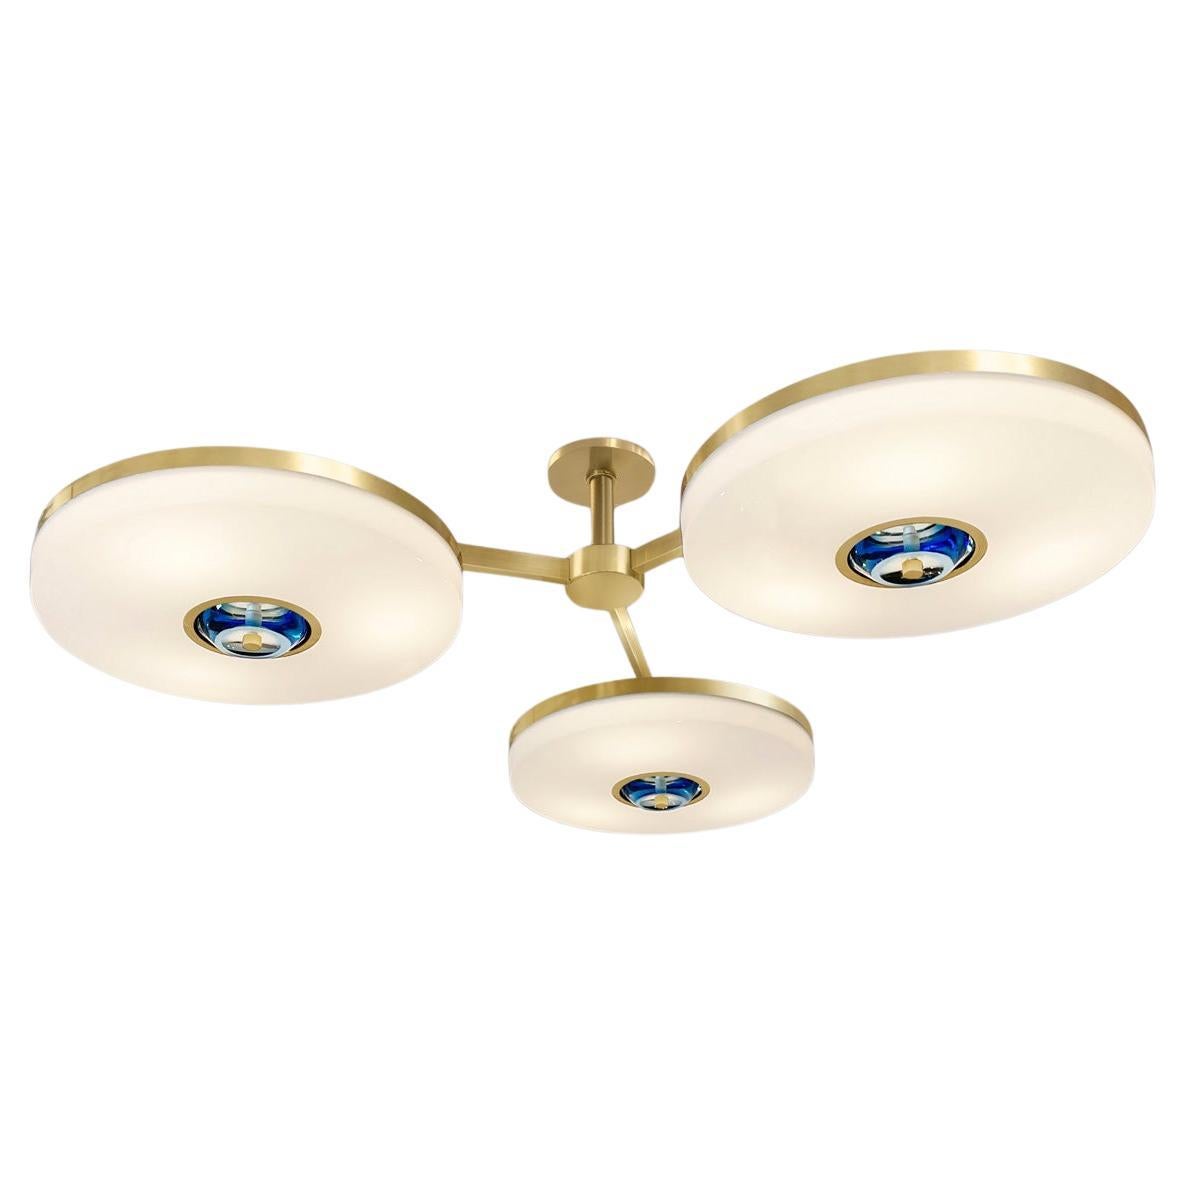 Iris N. 3 Ceiling Light by Gaspare Asaro-Satin Brass Finish For Sale